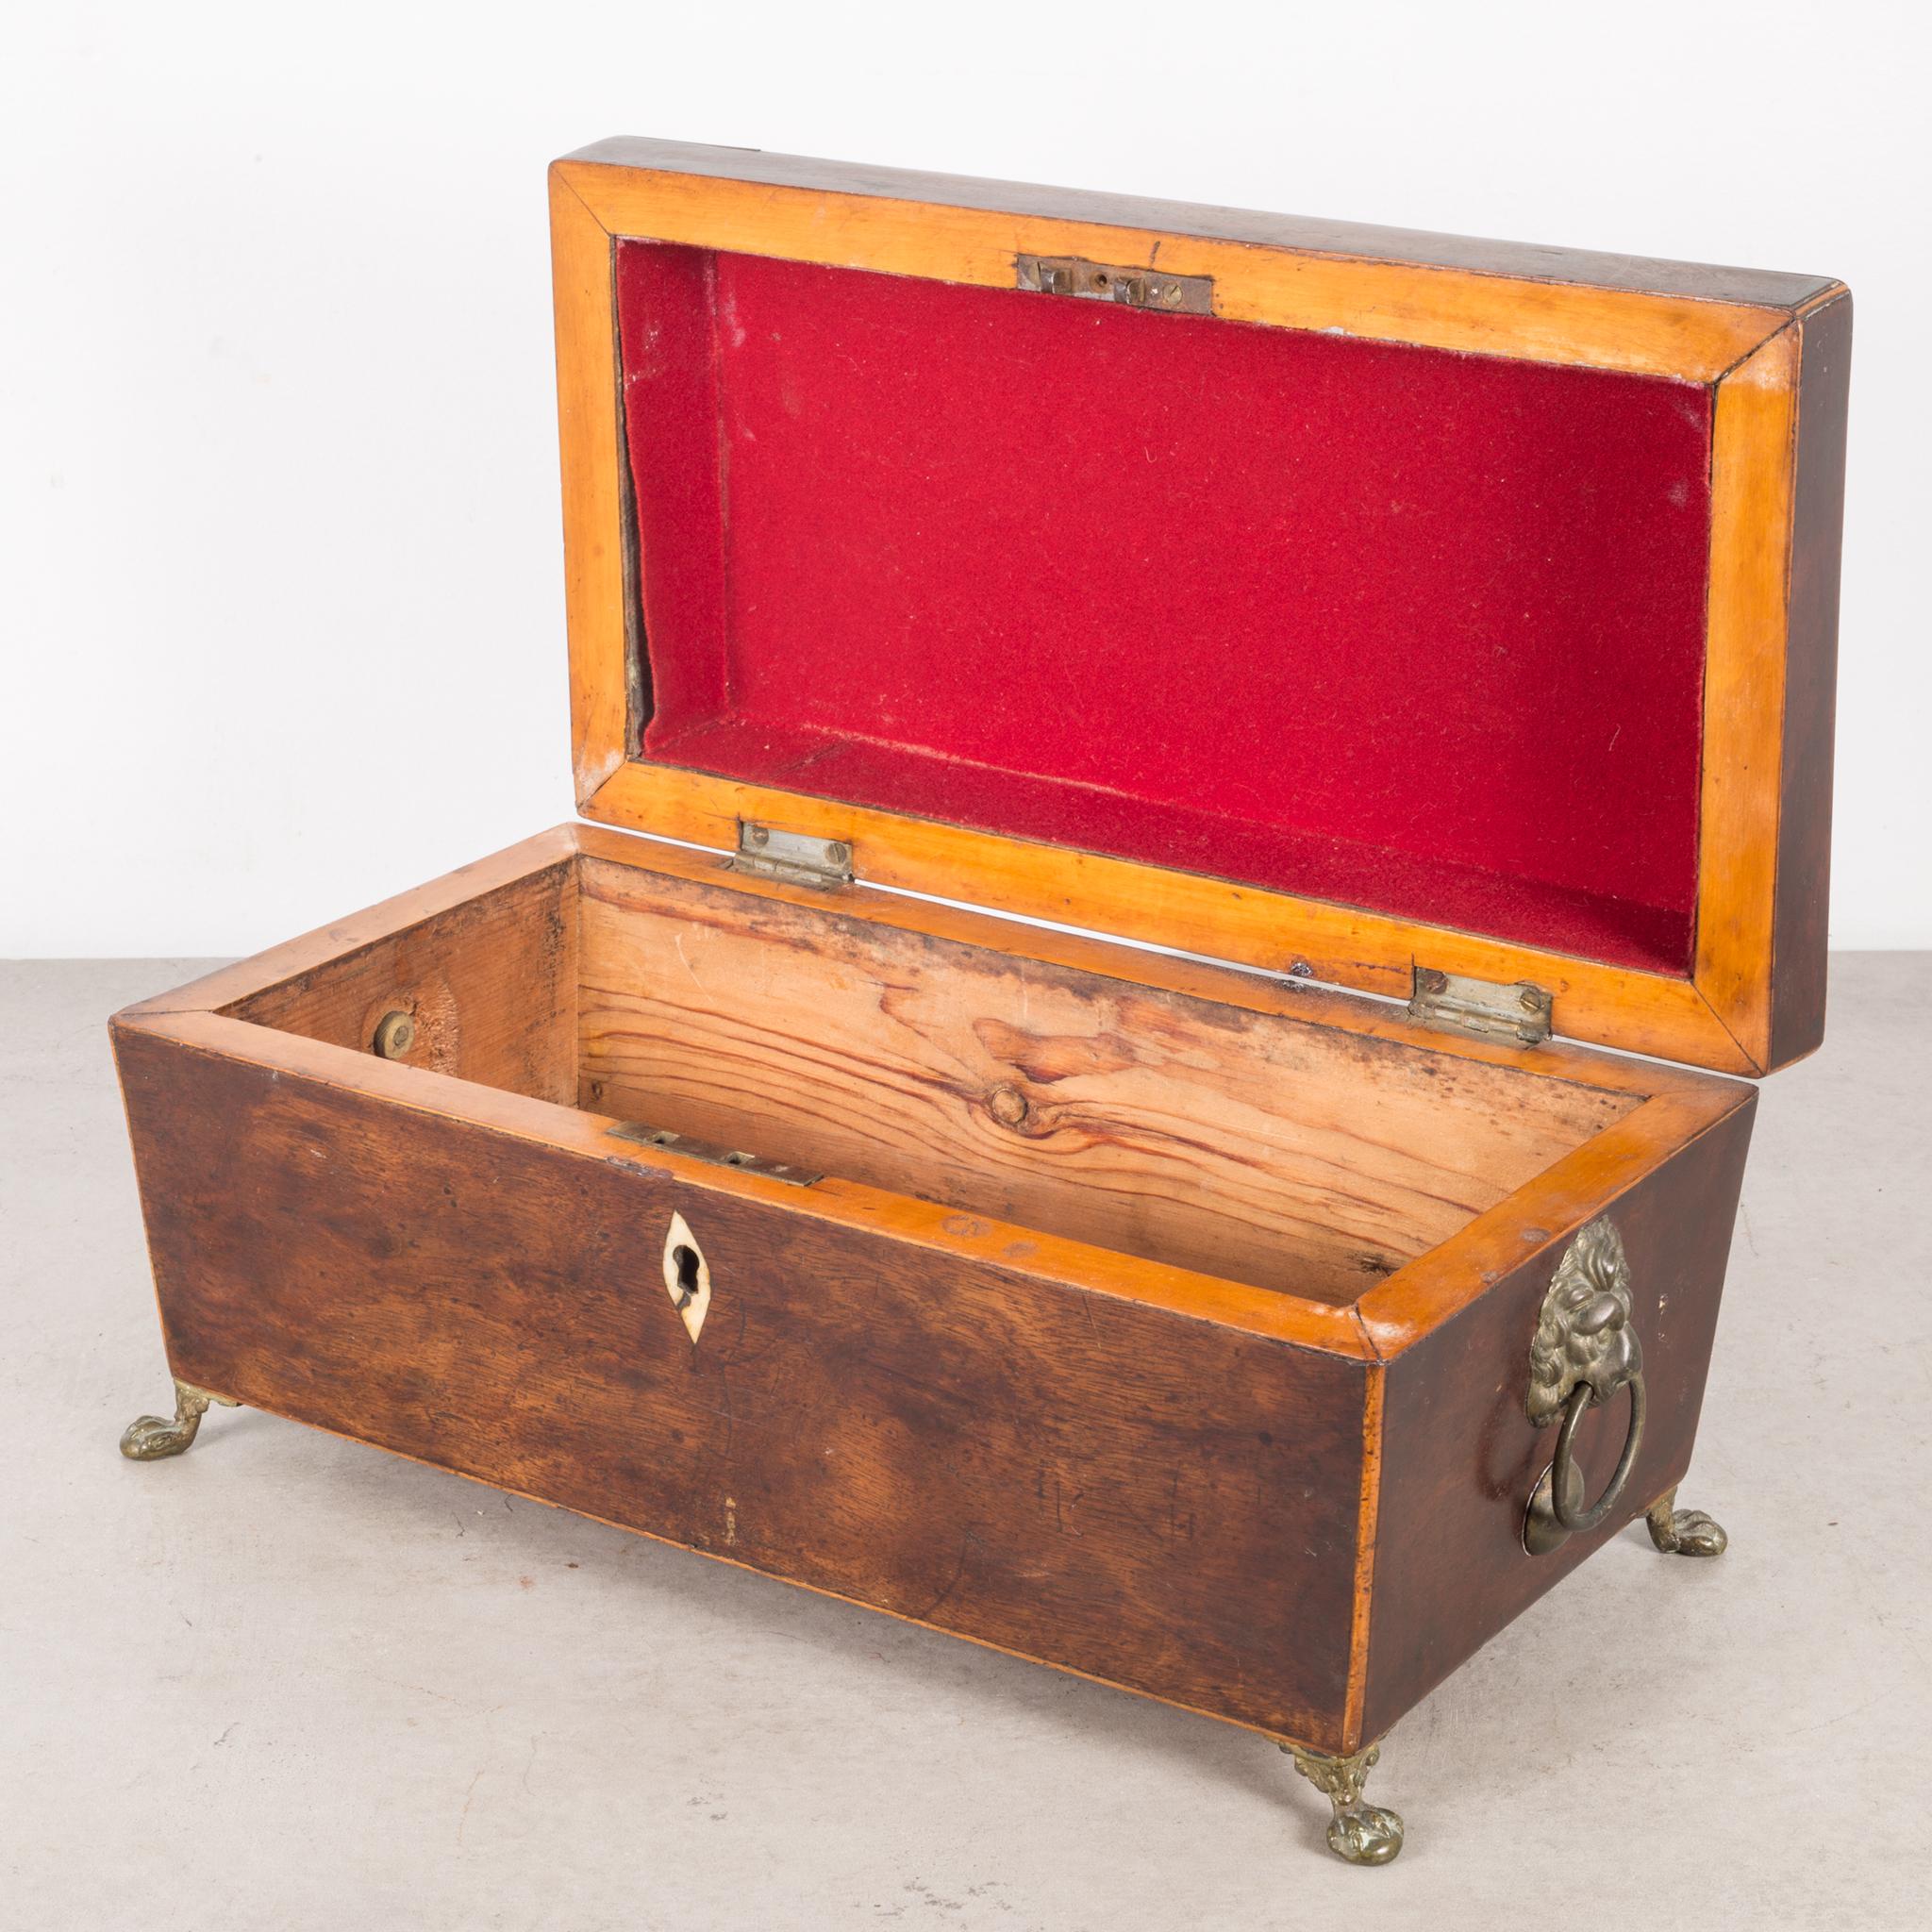 Regency (English) period rosewood sarcophagus form tea caddy,
having an inlaid bone escutcheon, brass lion head, red cloth interior and ring handles,
the whole resting on cast brass feet,
circa 1820.


  